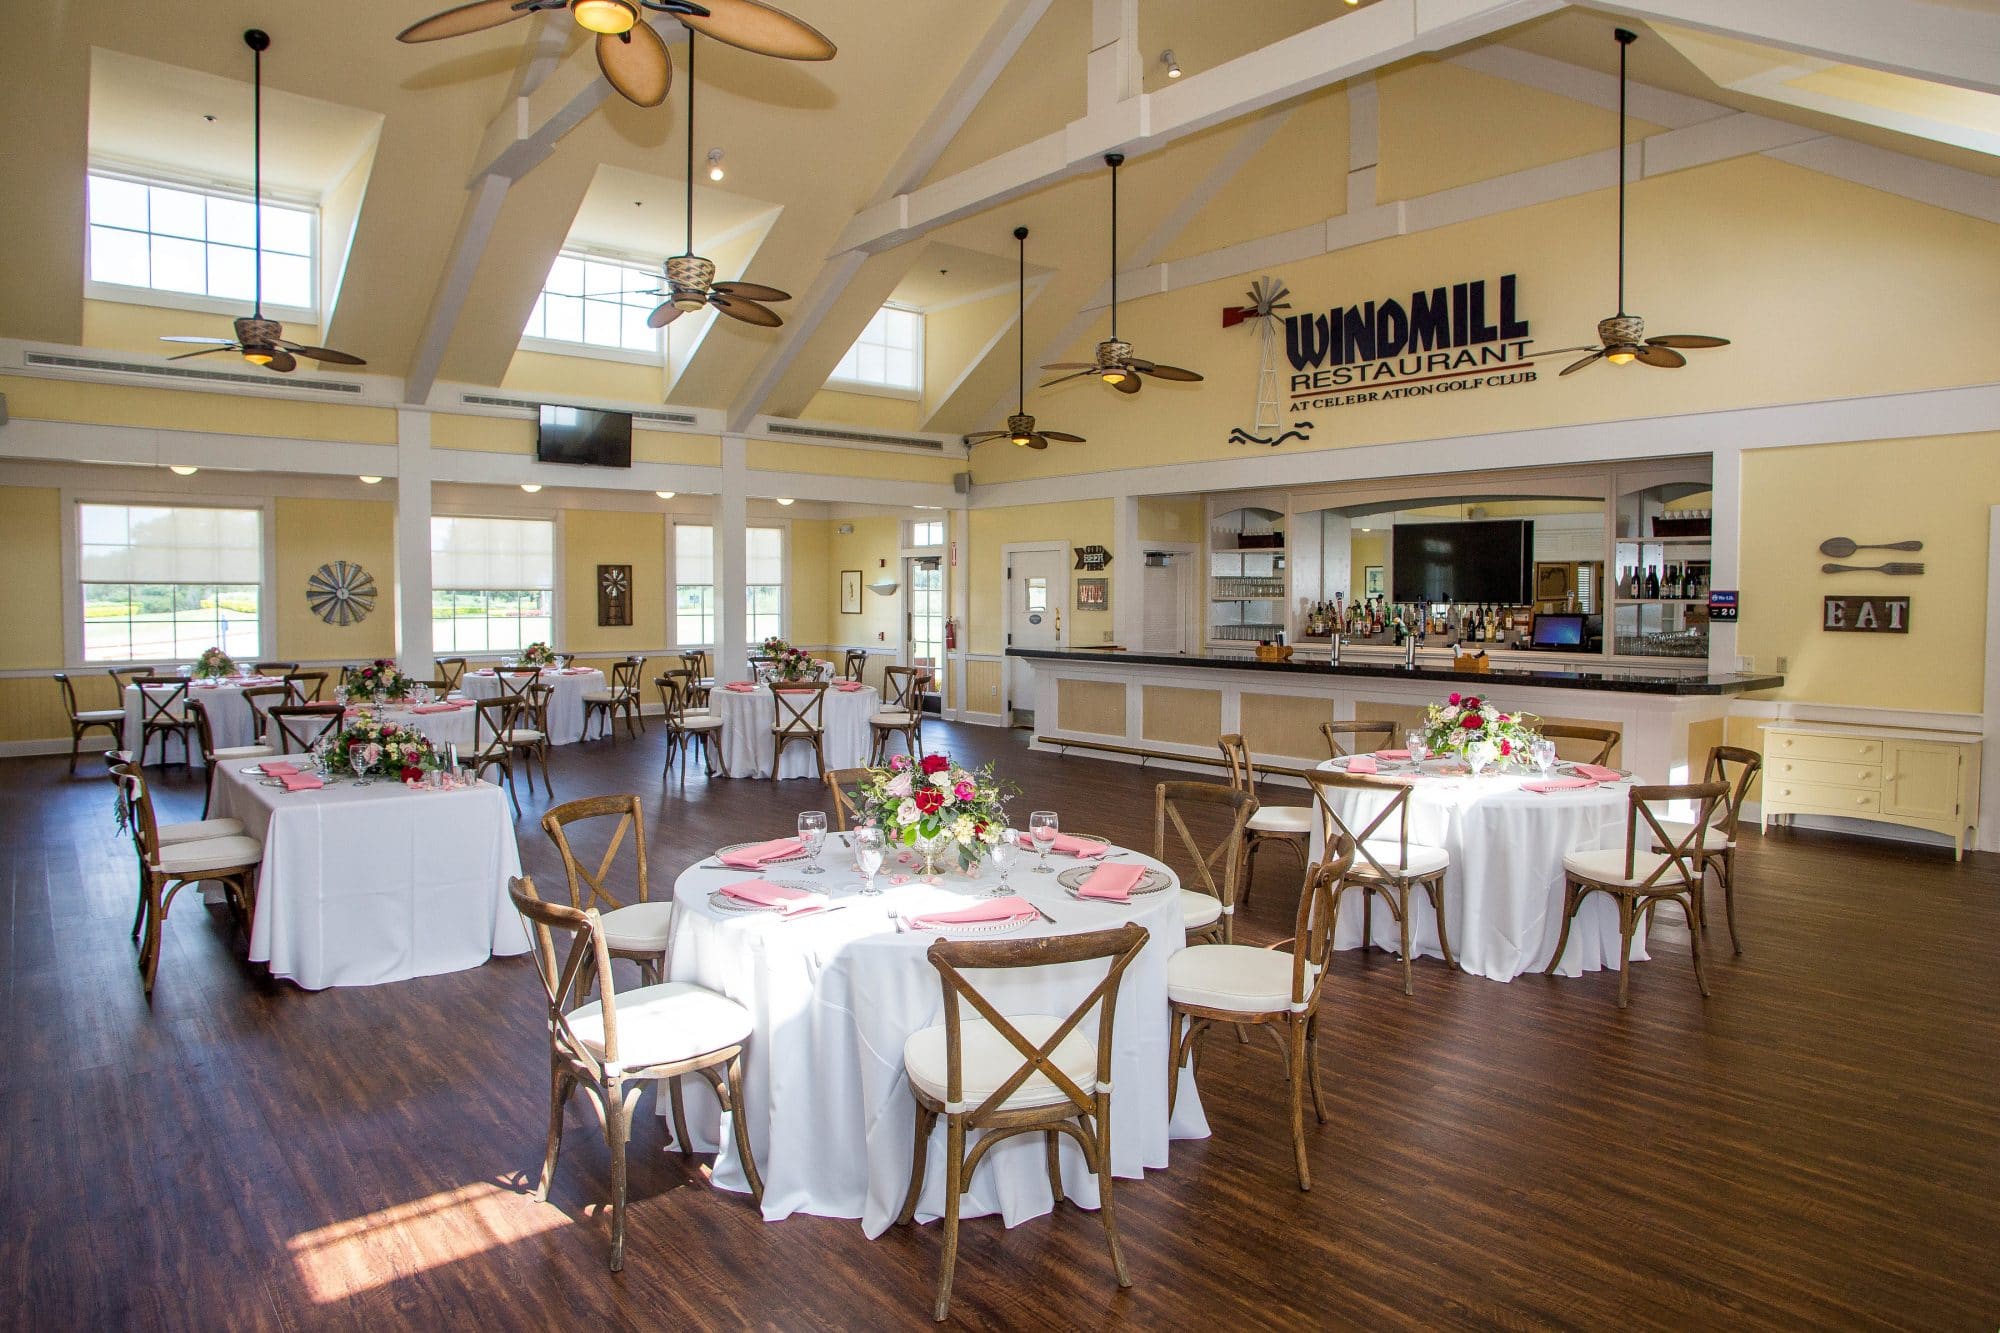 Celebration Golf Club - restaurant event space with tall vaulted ceilings